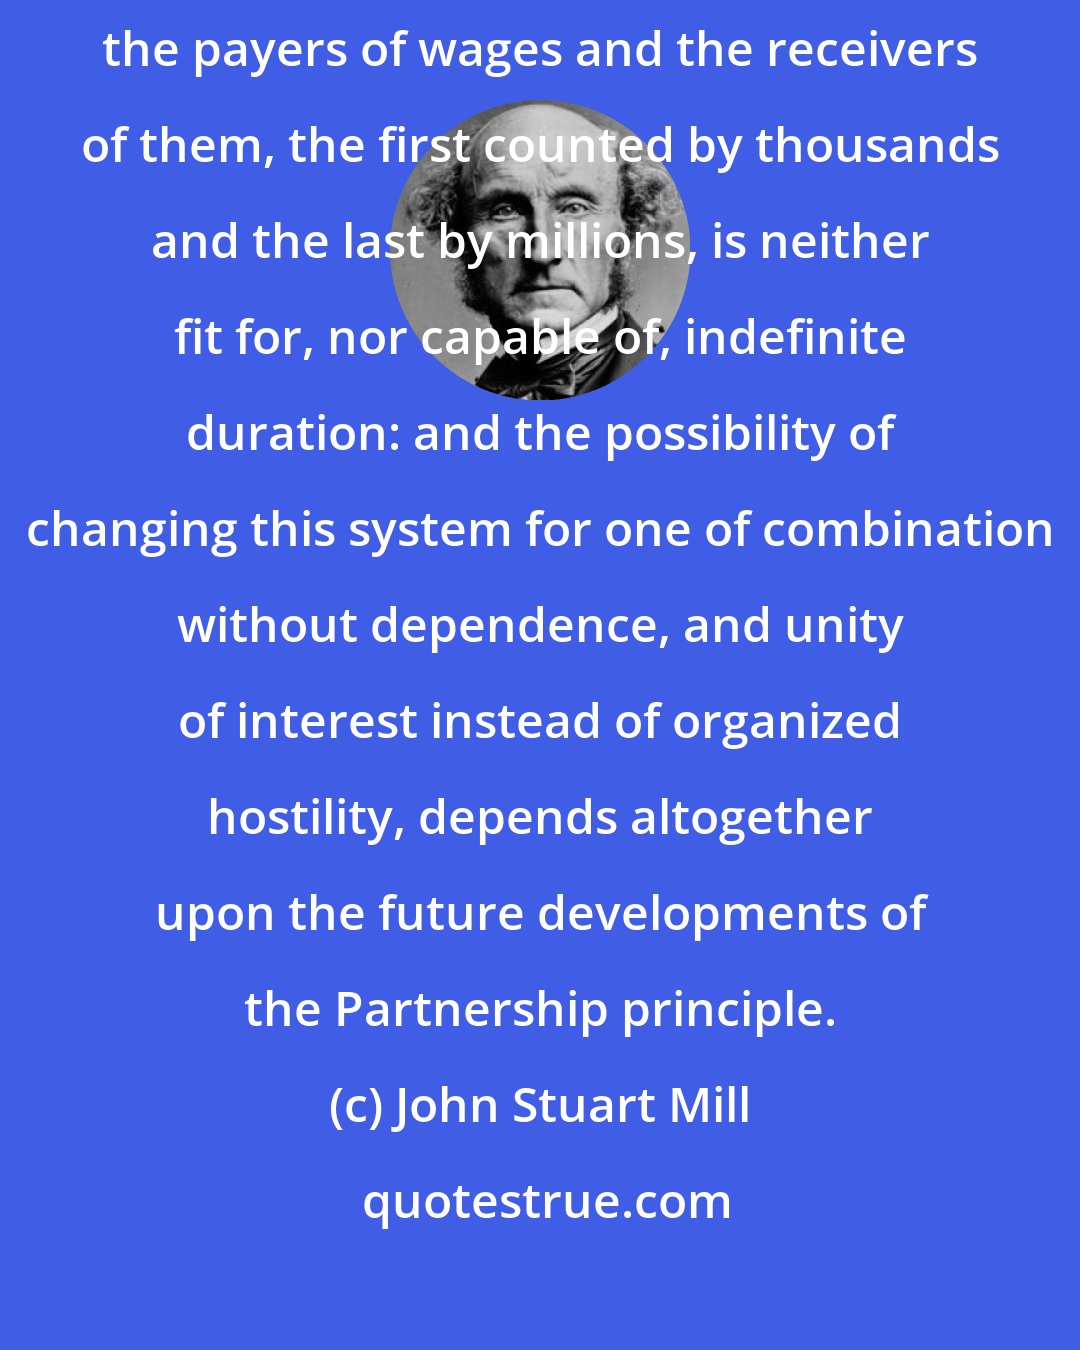 John Stuart Mill: The industrial economy which divides society absolutely into two portions, the payers of wages and the receivers of them, the first counted by thousands and the last by millions, is neither fit for, nor capable of, indefinite duration: and the possibility of changing this system for one of combination without dependence, and unity of interest instead of organized hostility, depends altogether upon the future developments of the Partnership principle.